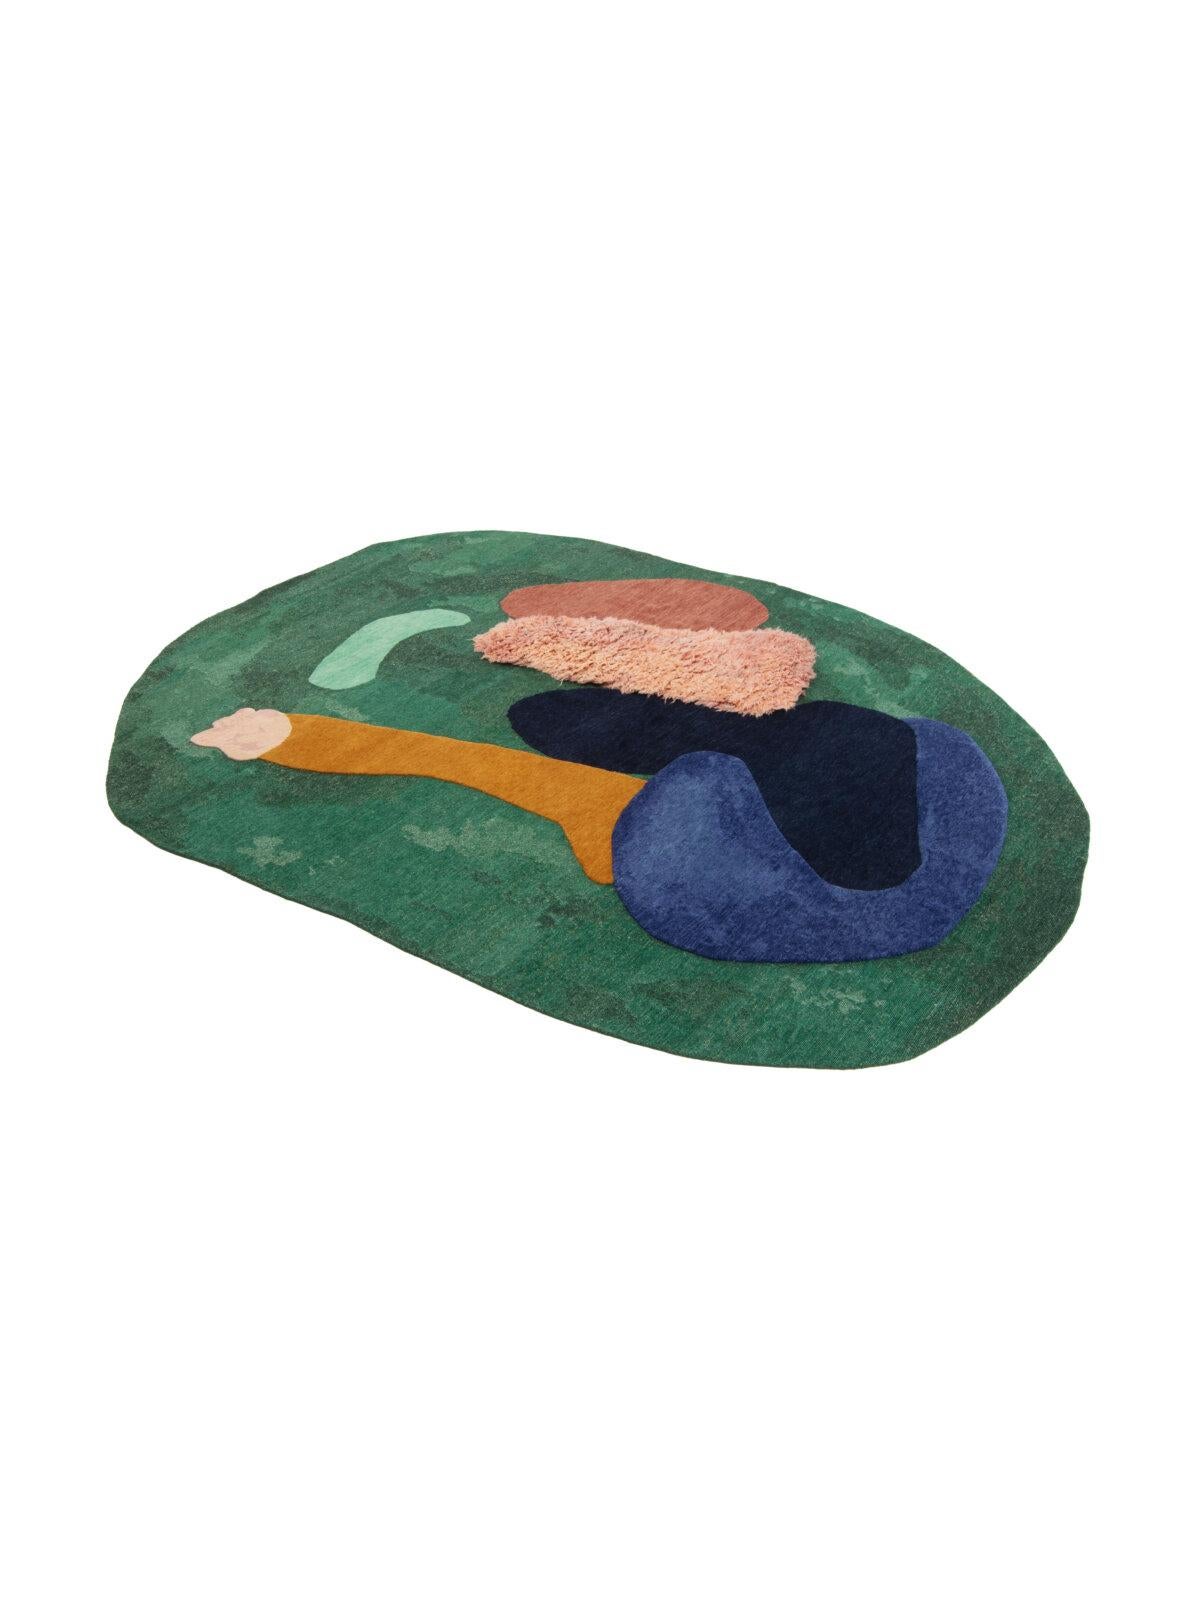 Wool cc-tapis RUDE COLLECTION - TONGUE-AND-CHEEK handmade rug by Faye Toogood For Sale